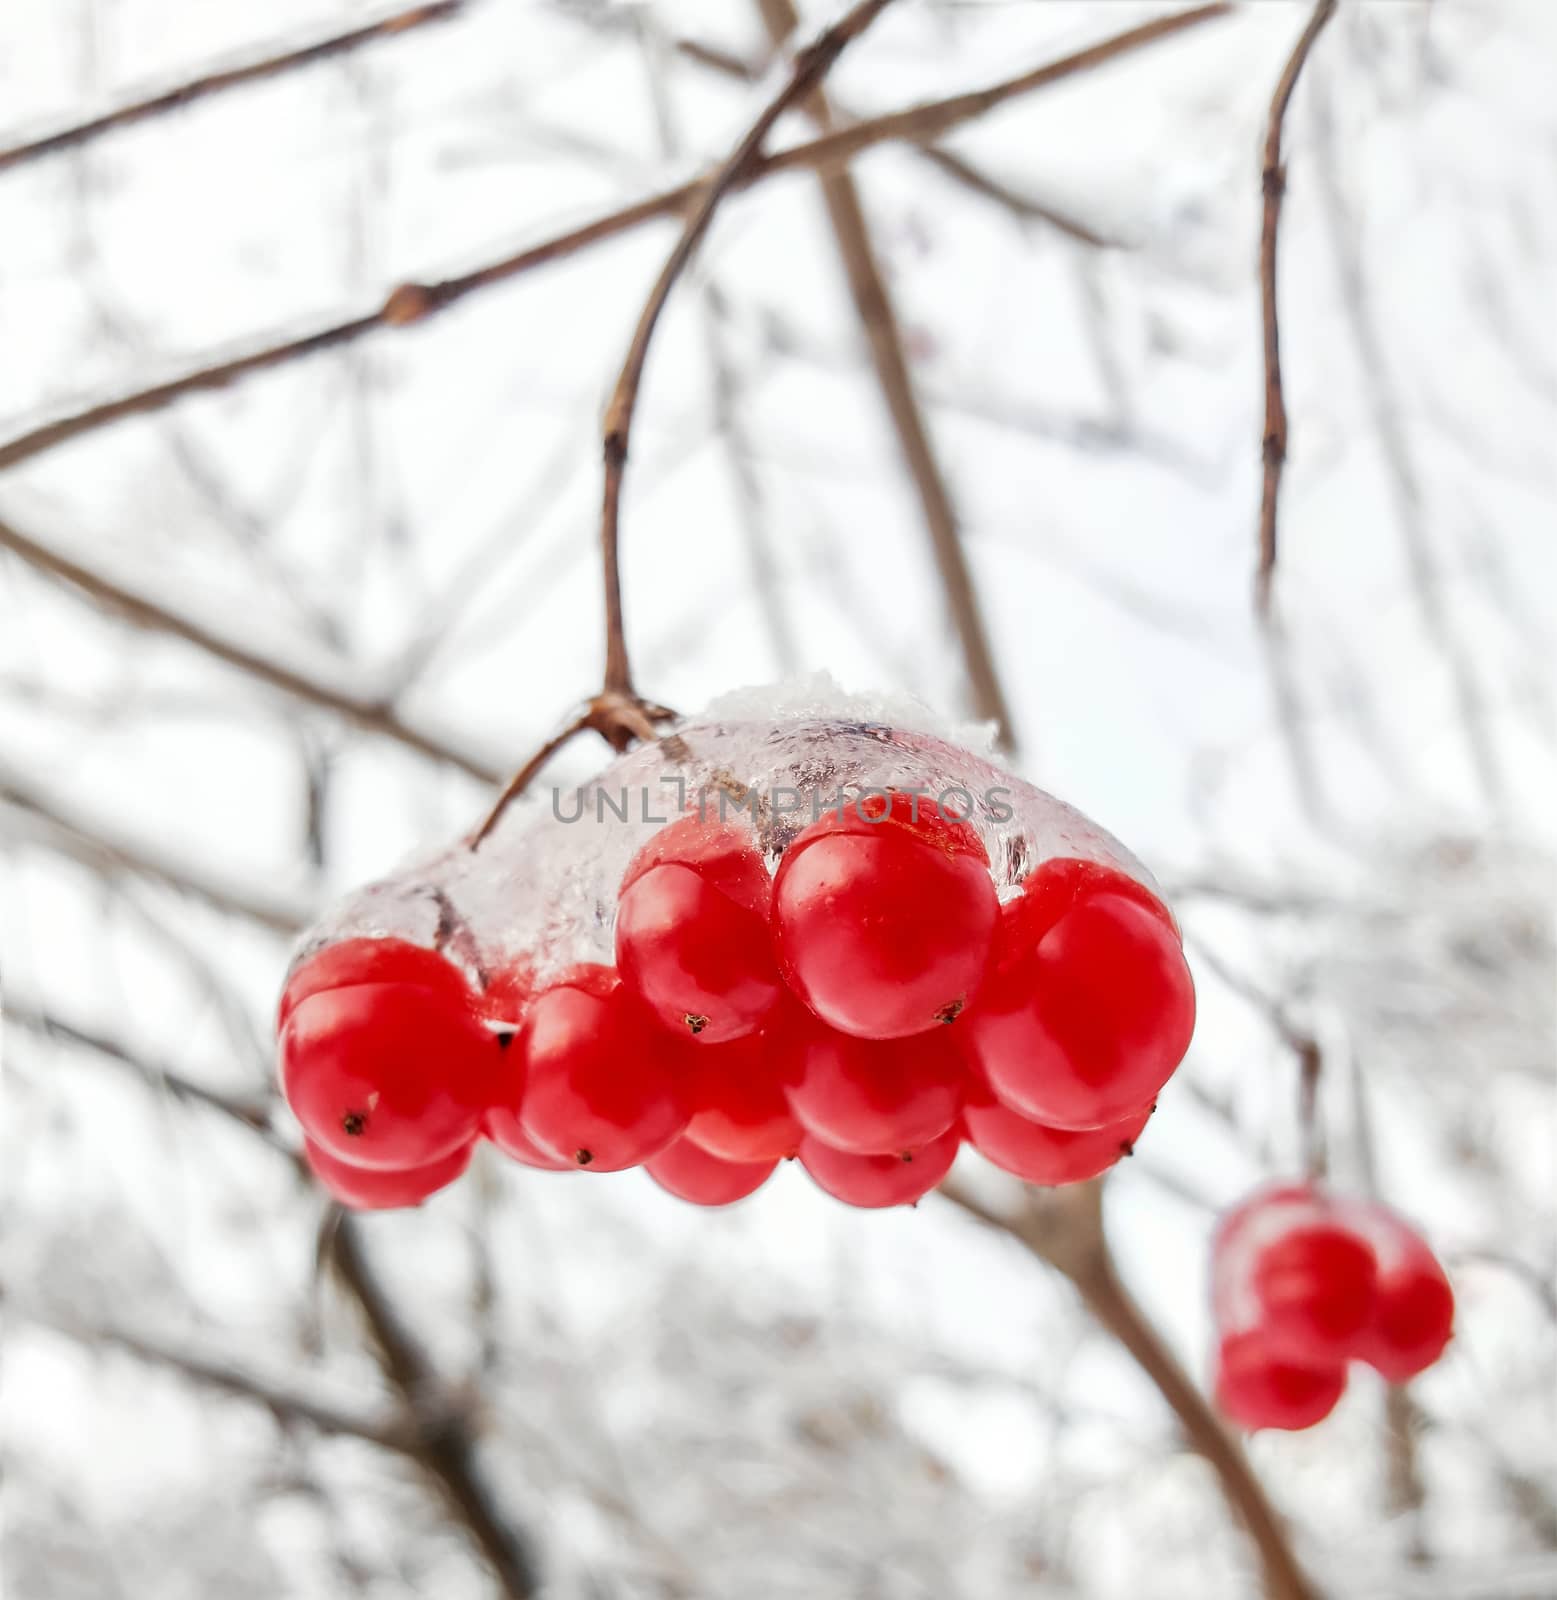 Viburnum branch with red berries in snow by zeffss